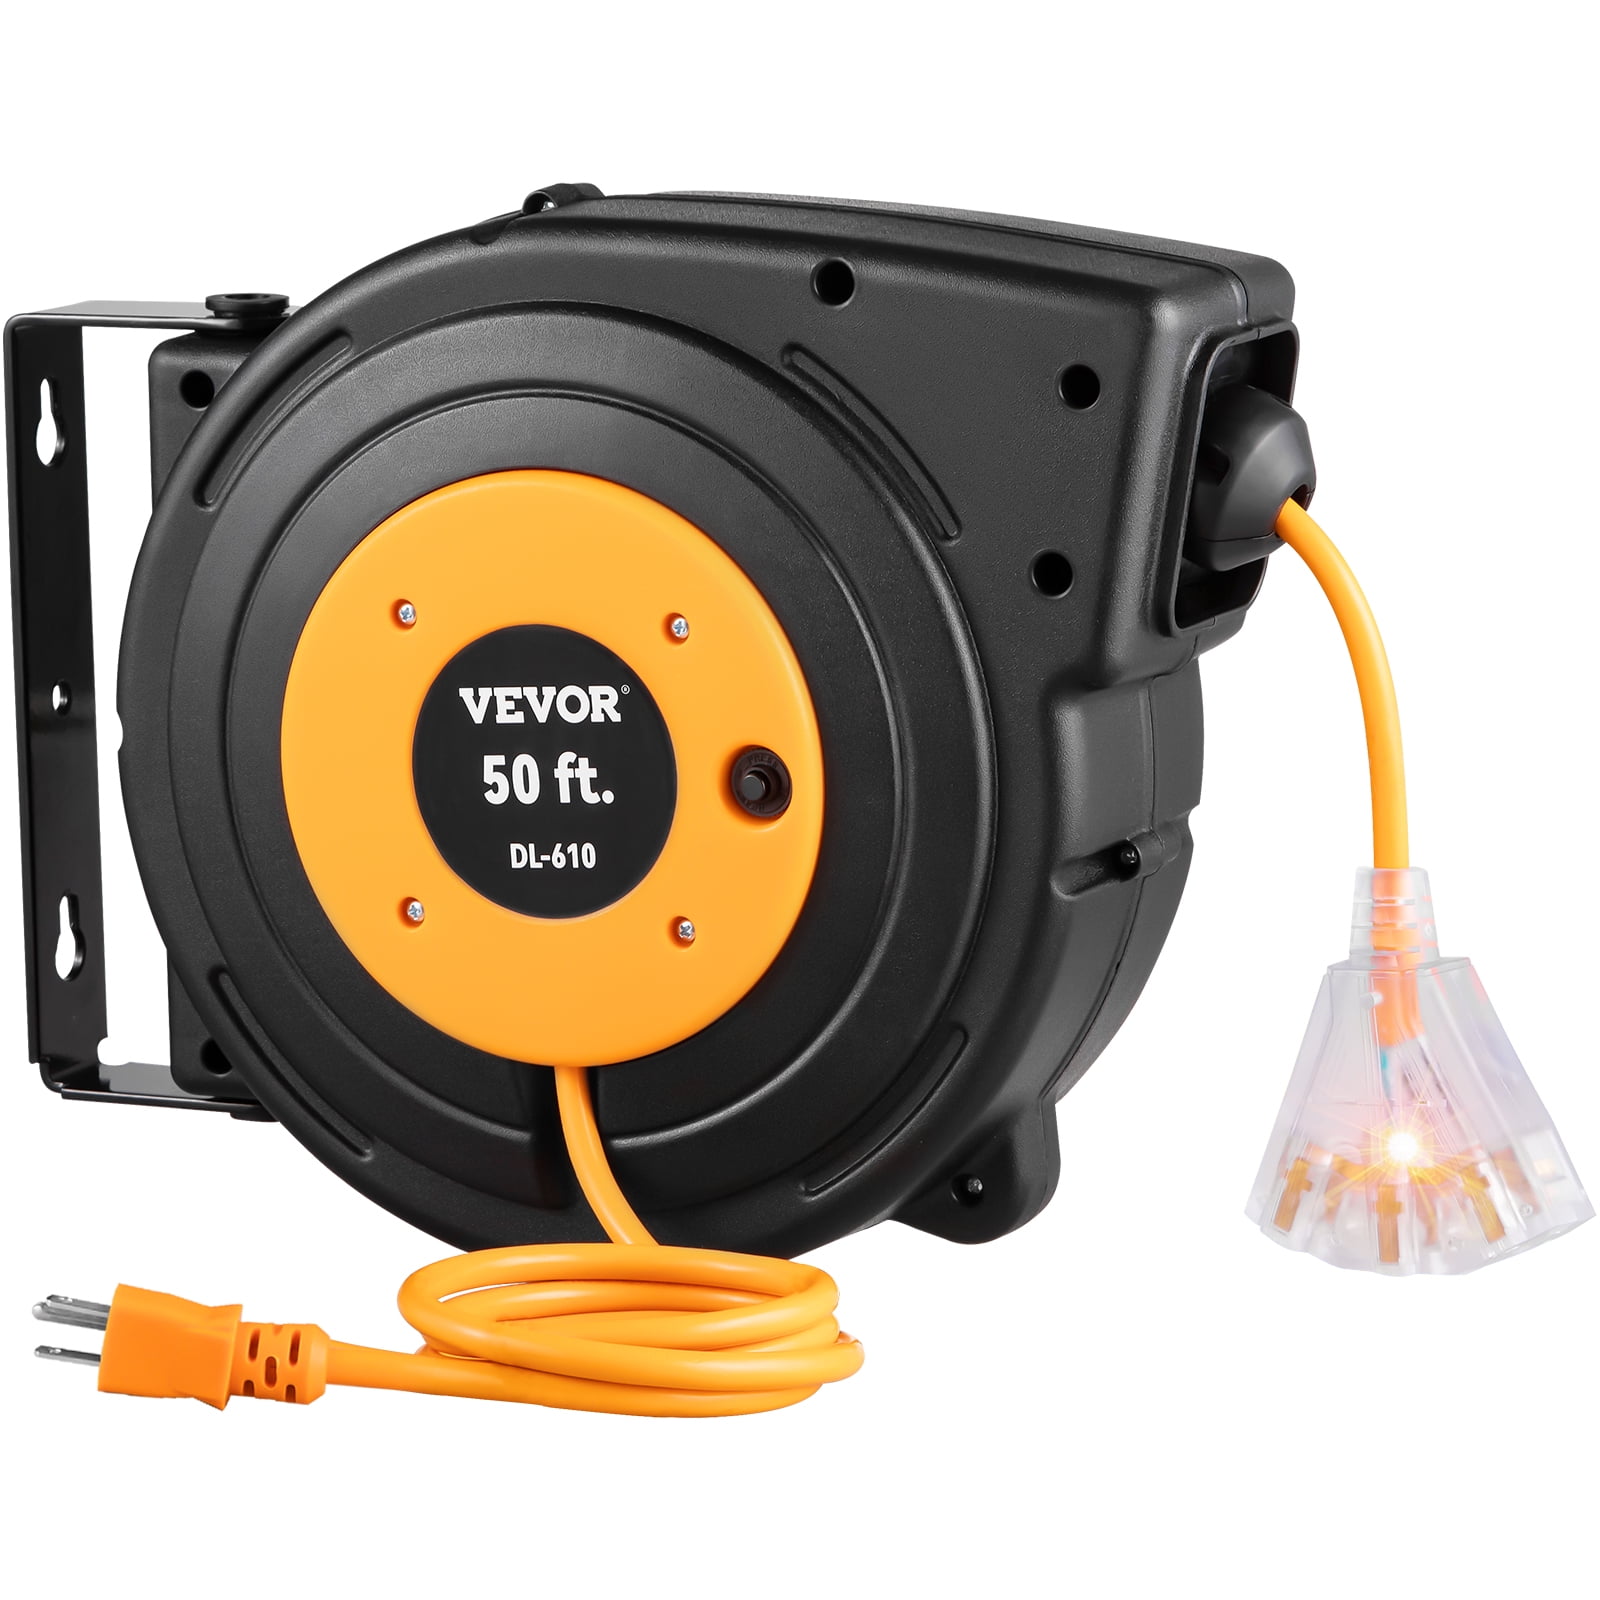 VEVOR Retractable Extension Cord Reel 50 ft Heavy Duty 14AWG/3C Sjtow Power Cord with Lighted Triple Tap Outlet 13 Amp Circuit Breaker 180° Swivel